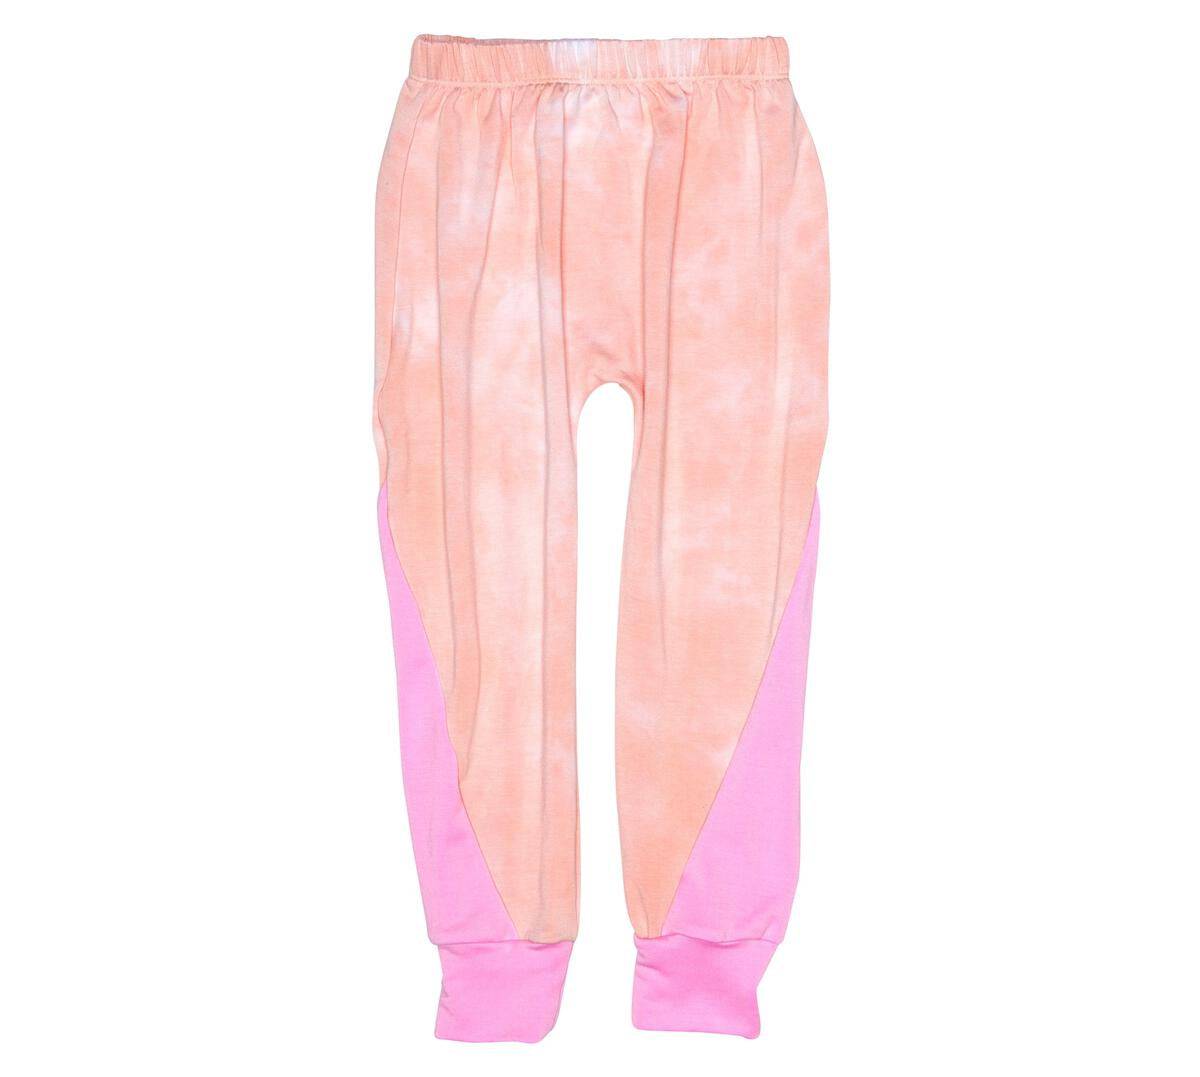 Block Pant in Textured Peach & Candy - Twinkle Twinkle Little One